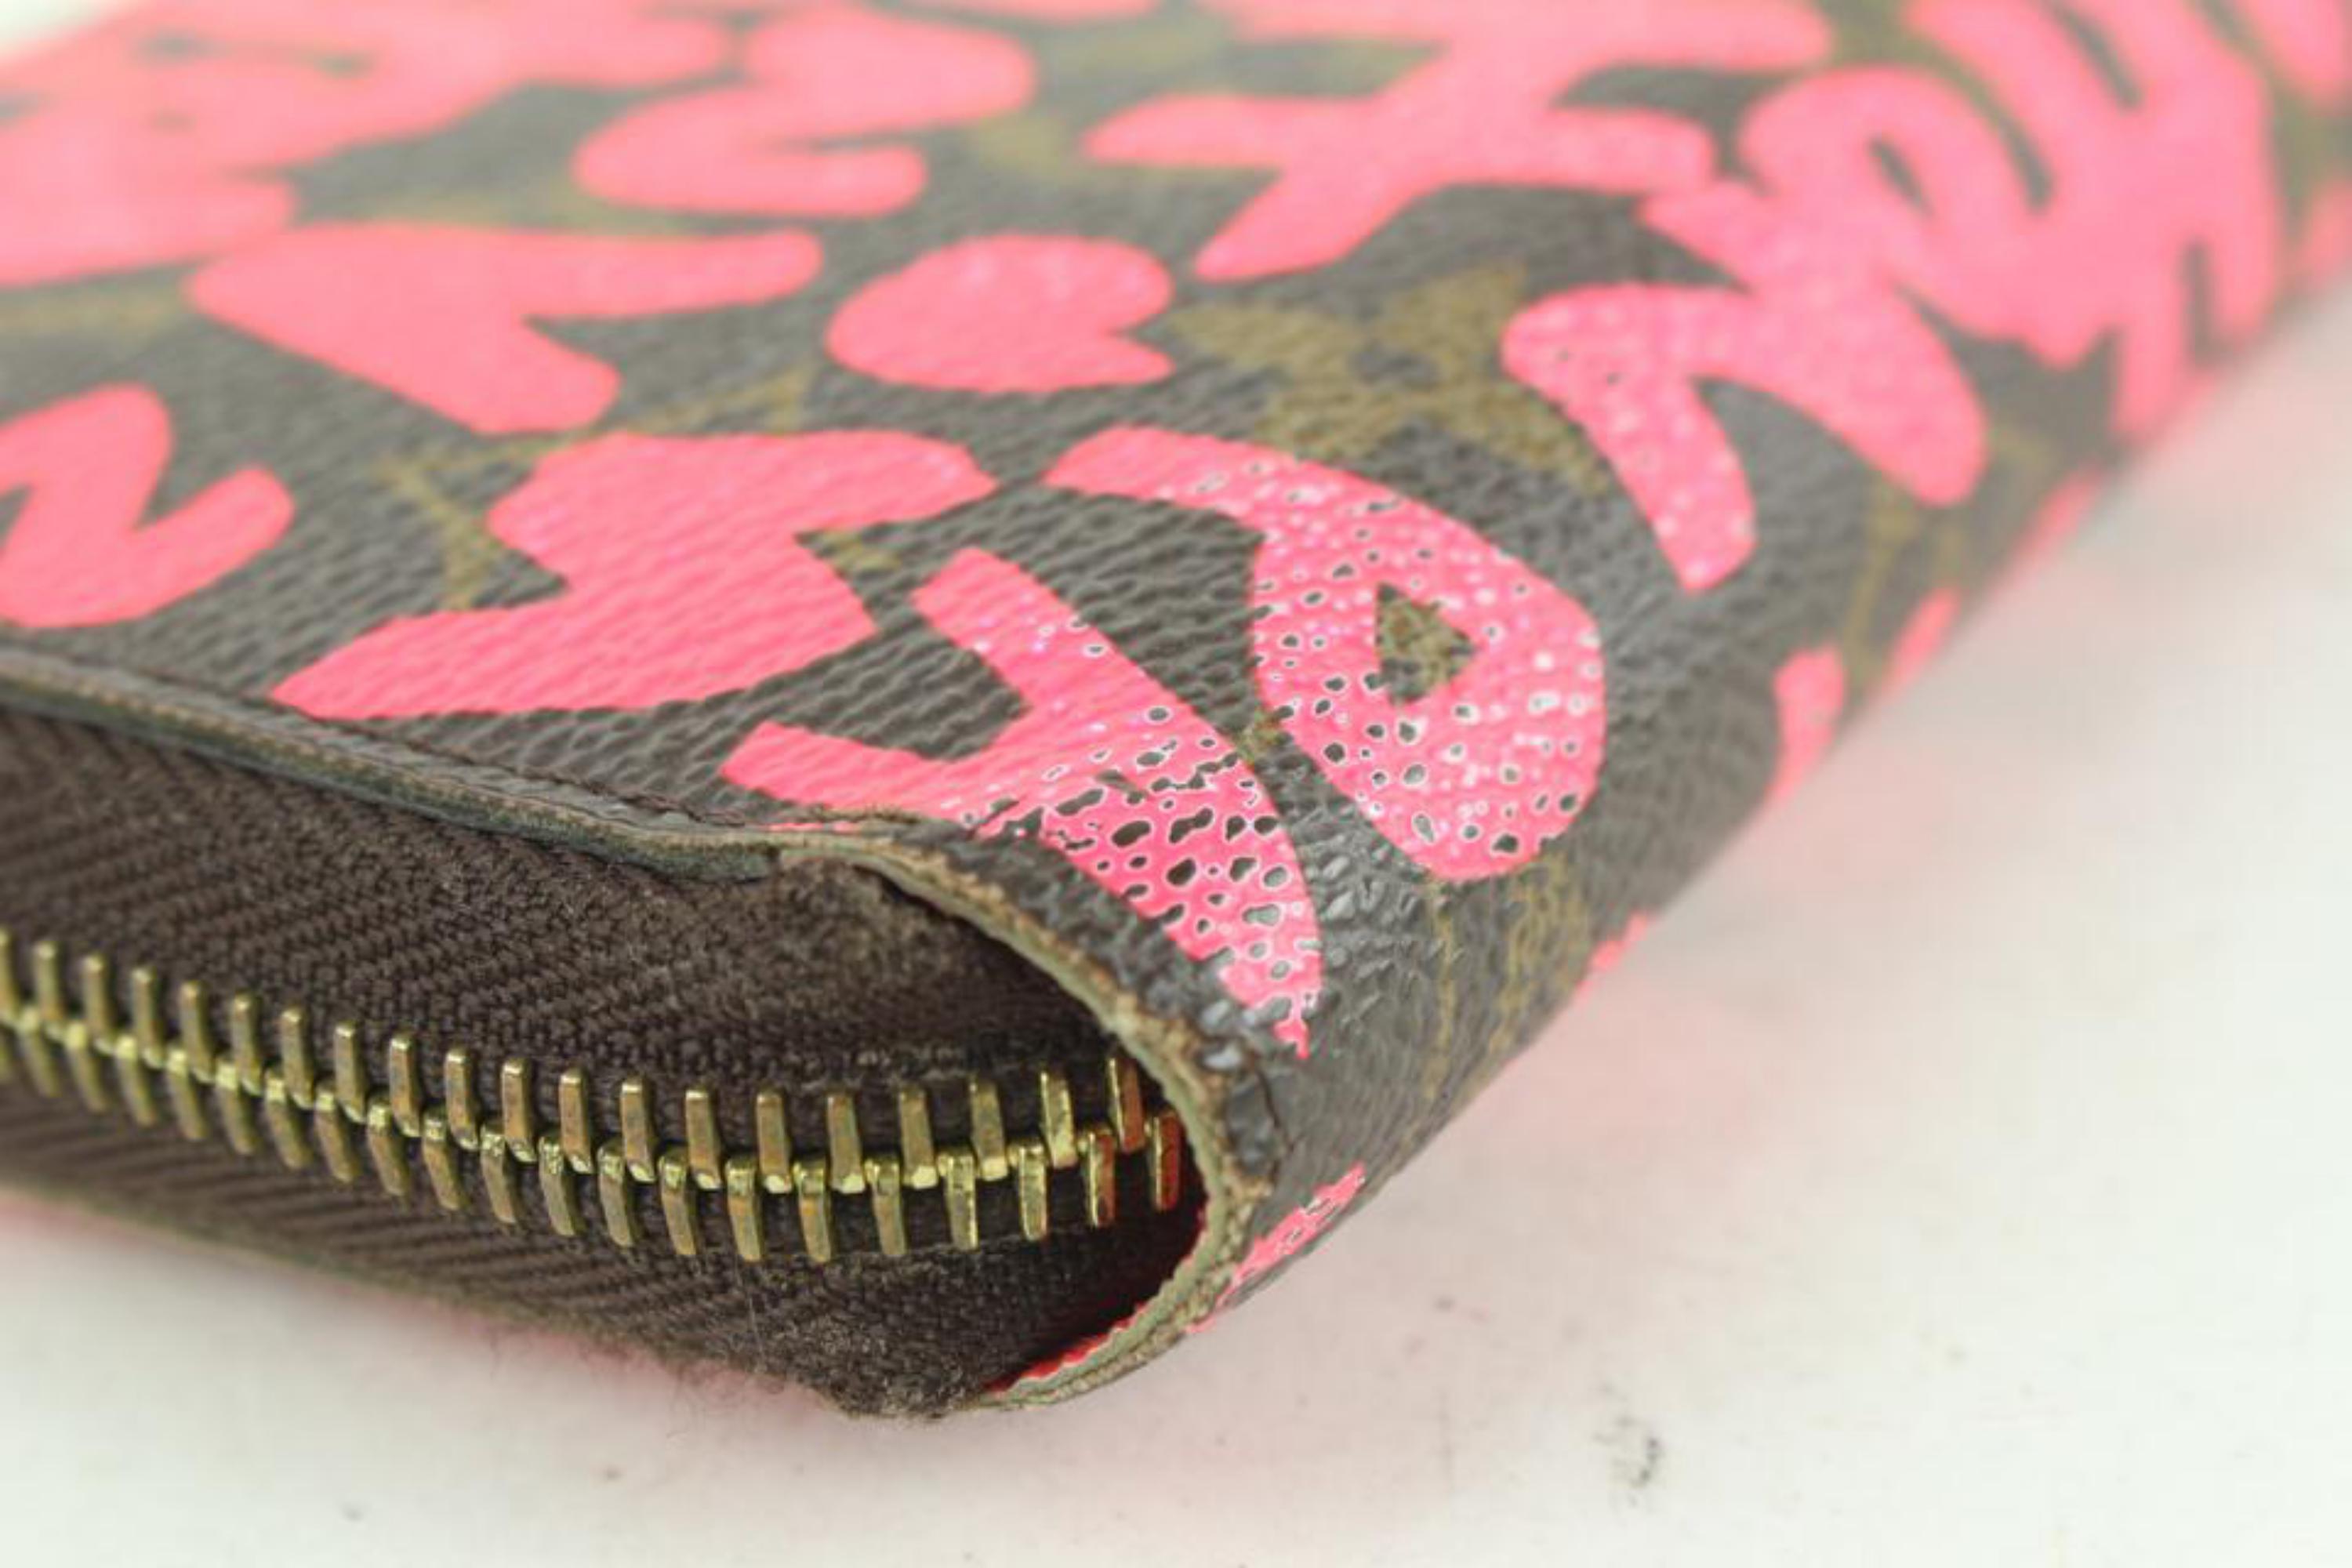 Louis Vuitton Sprouse Pink Monogram Graffiti Zippy Wallet Long Zip 10L830a In Fair Condition For Sale In Dix hills, NY